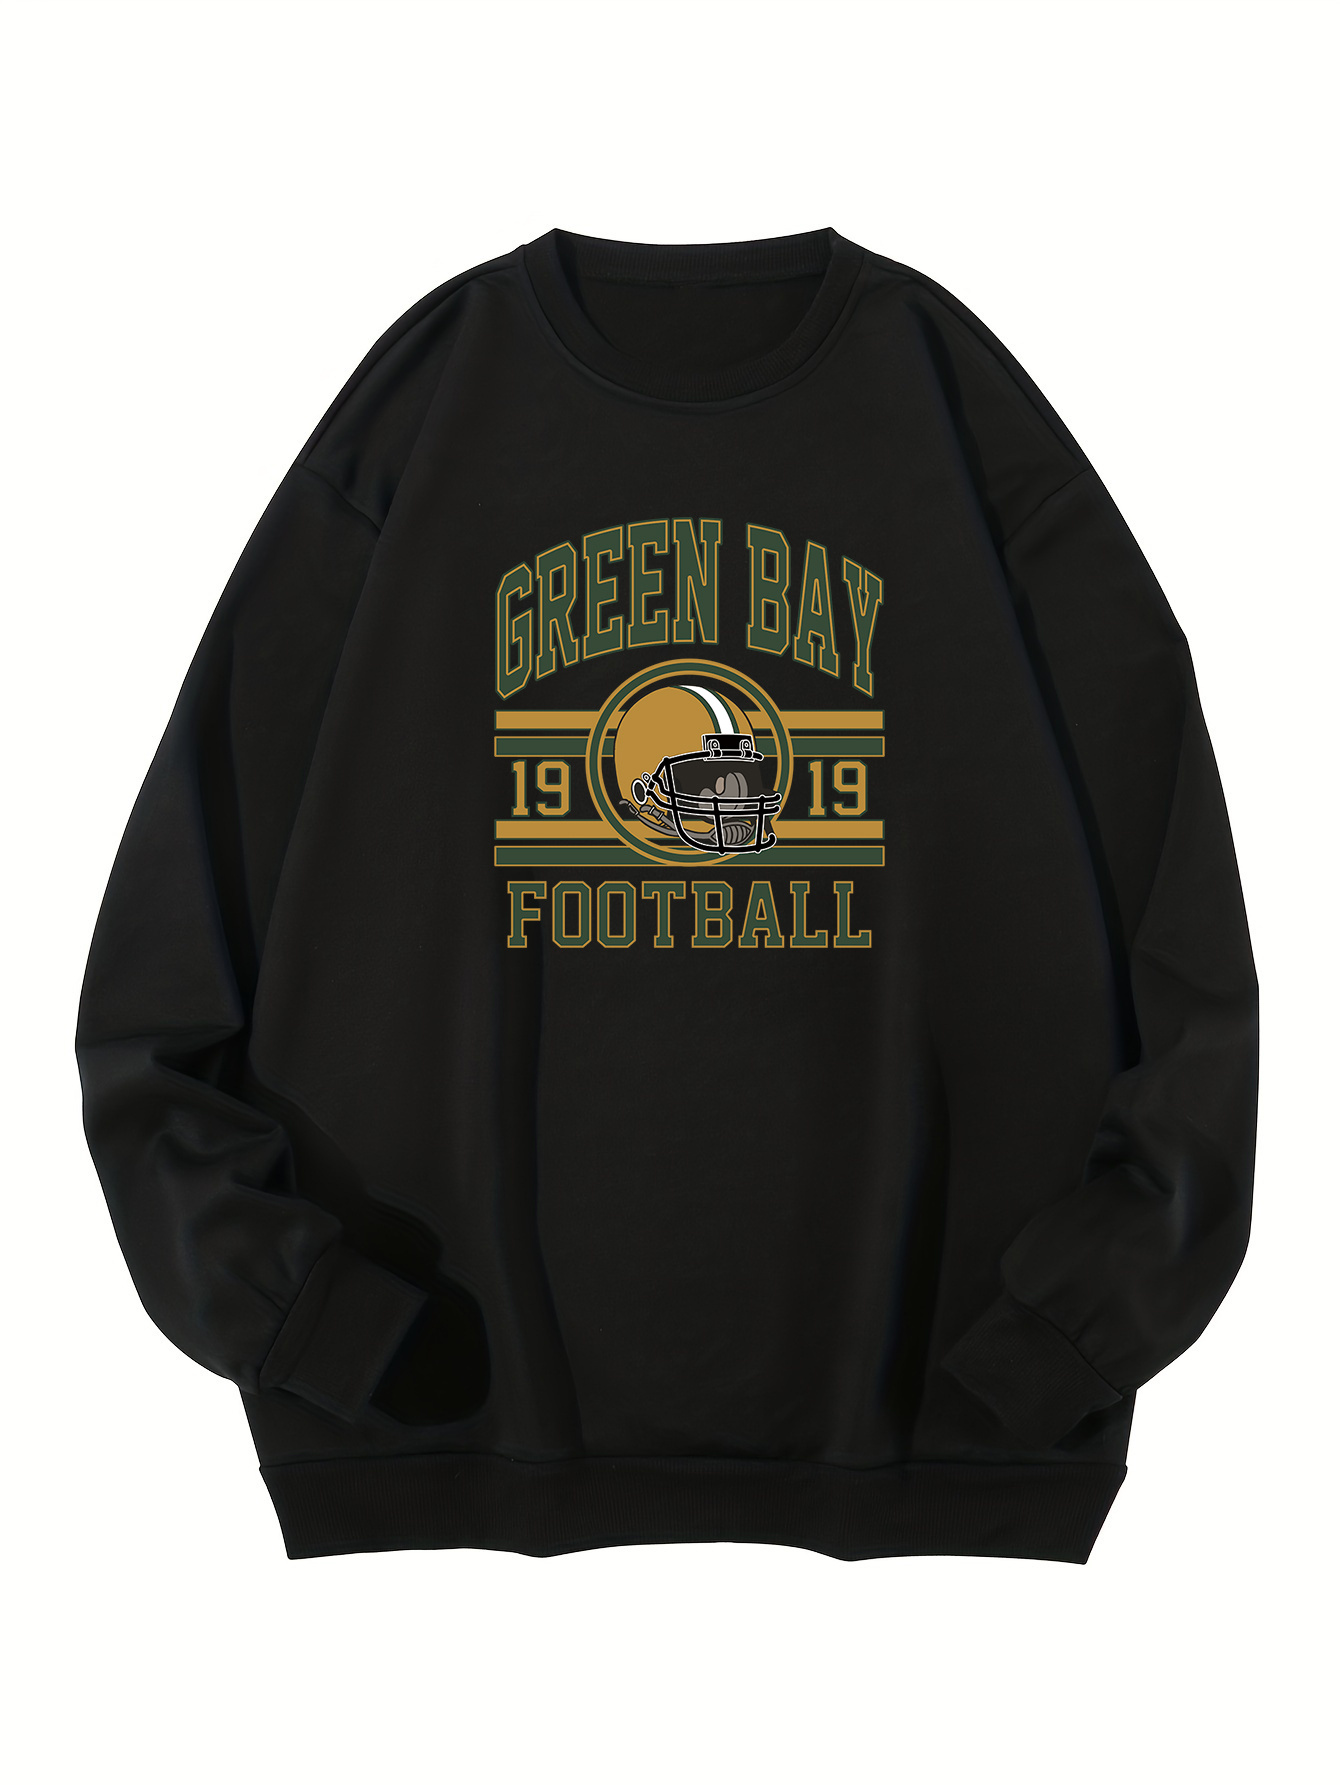 Green Bay Packers Plus Sizes Apparel, Packers Plus Sizes Clothing, Green  Bay Plus Sizes Polos & Tees